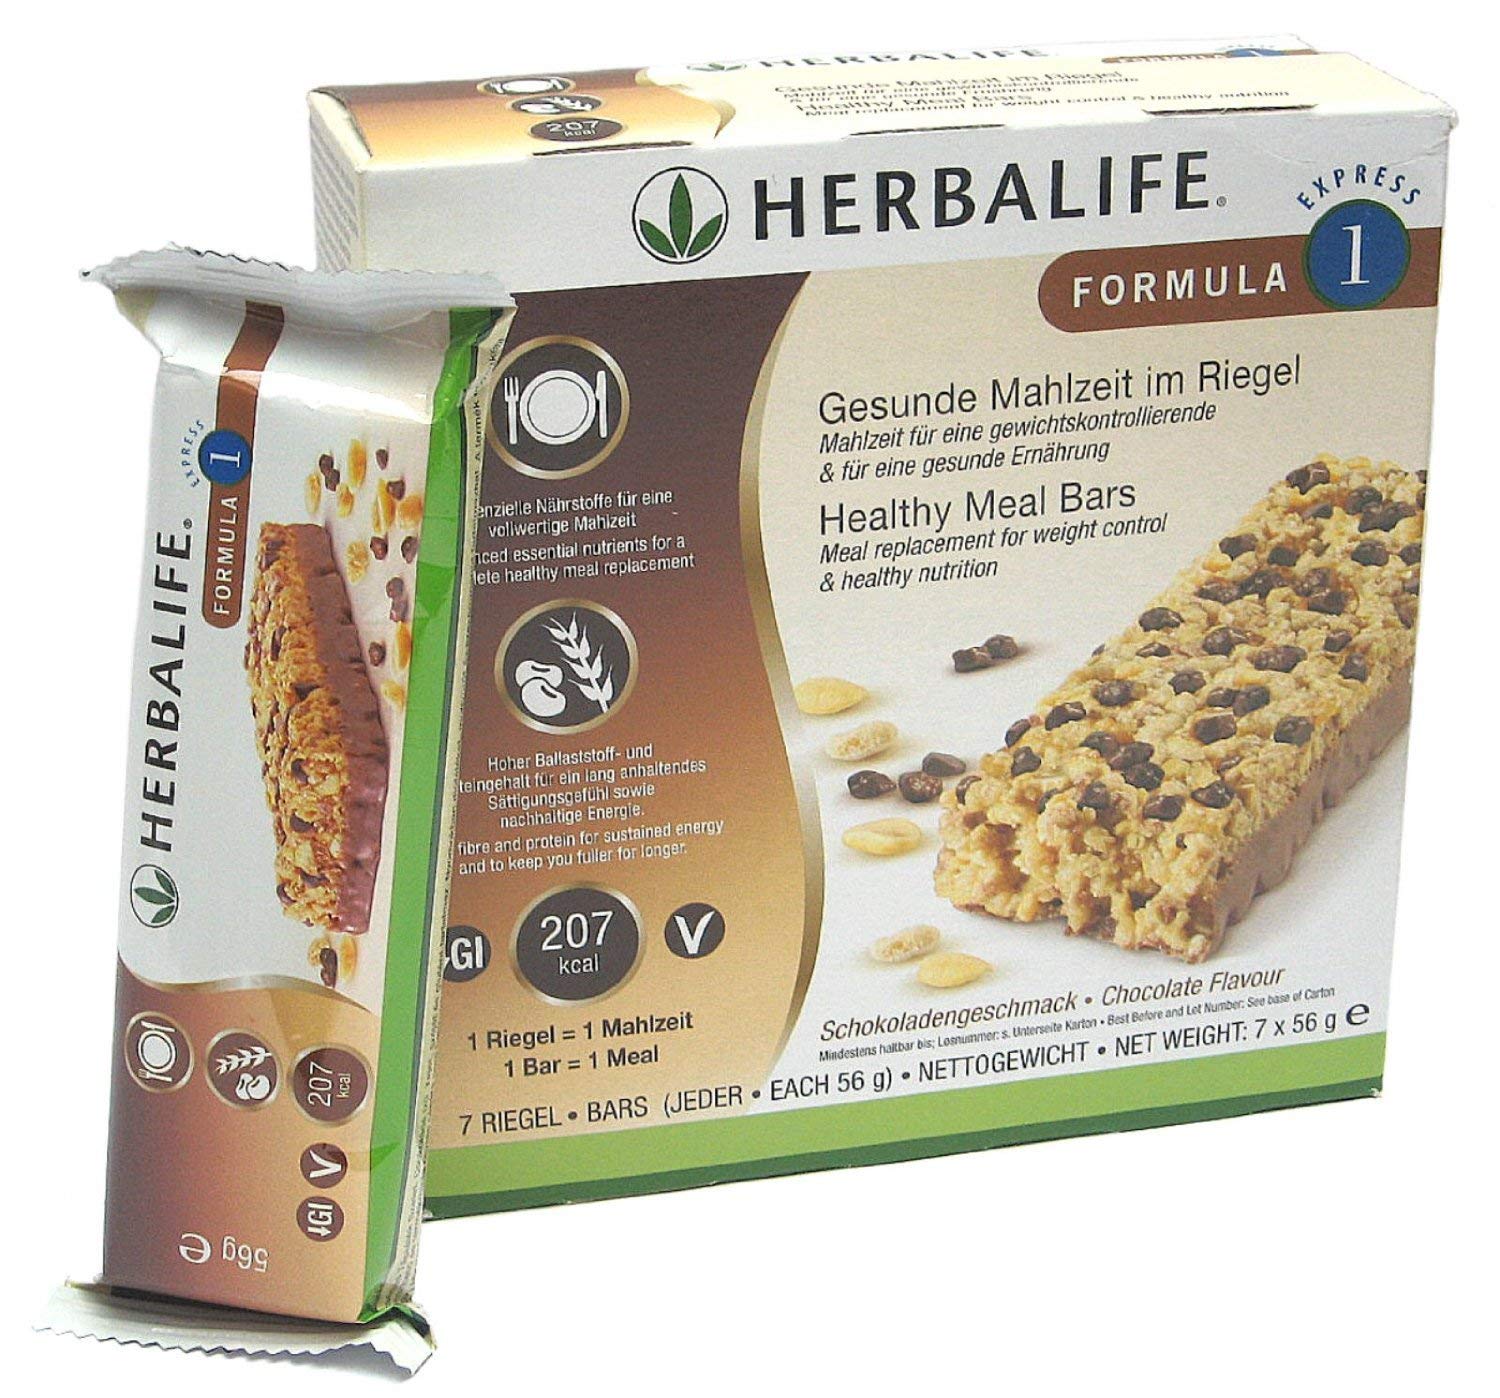 Great meal replacement with 5g of fiber, 21 vitamins and minerals, - Herbalife Formula 1 Express Meal Bar (Cookies-n-Cream)